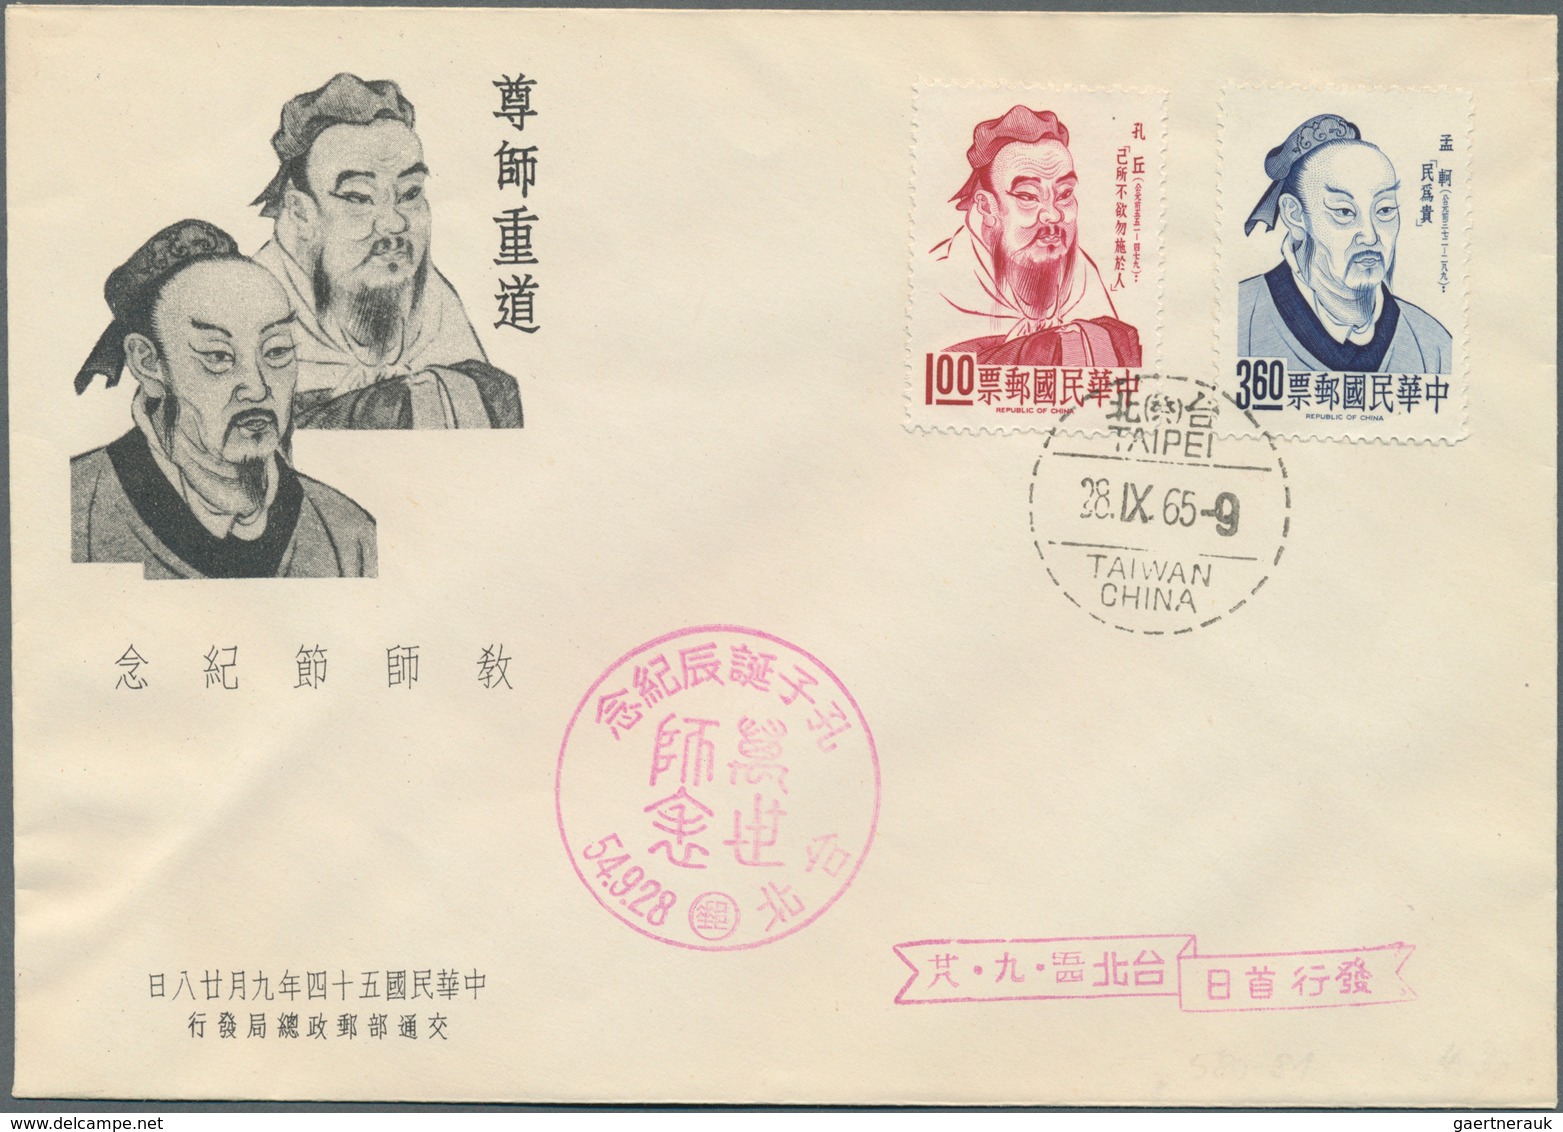 22426 China - Taiwan (Formosa): 1956/80, cover lot with commercially used (24), FFC (10), FDC (22, inc. em